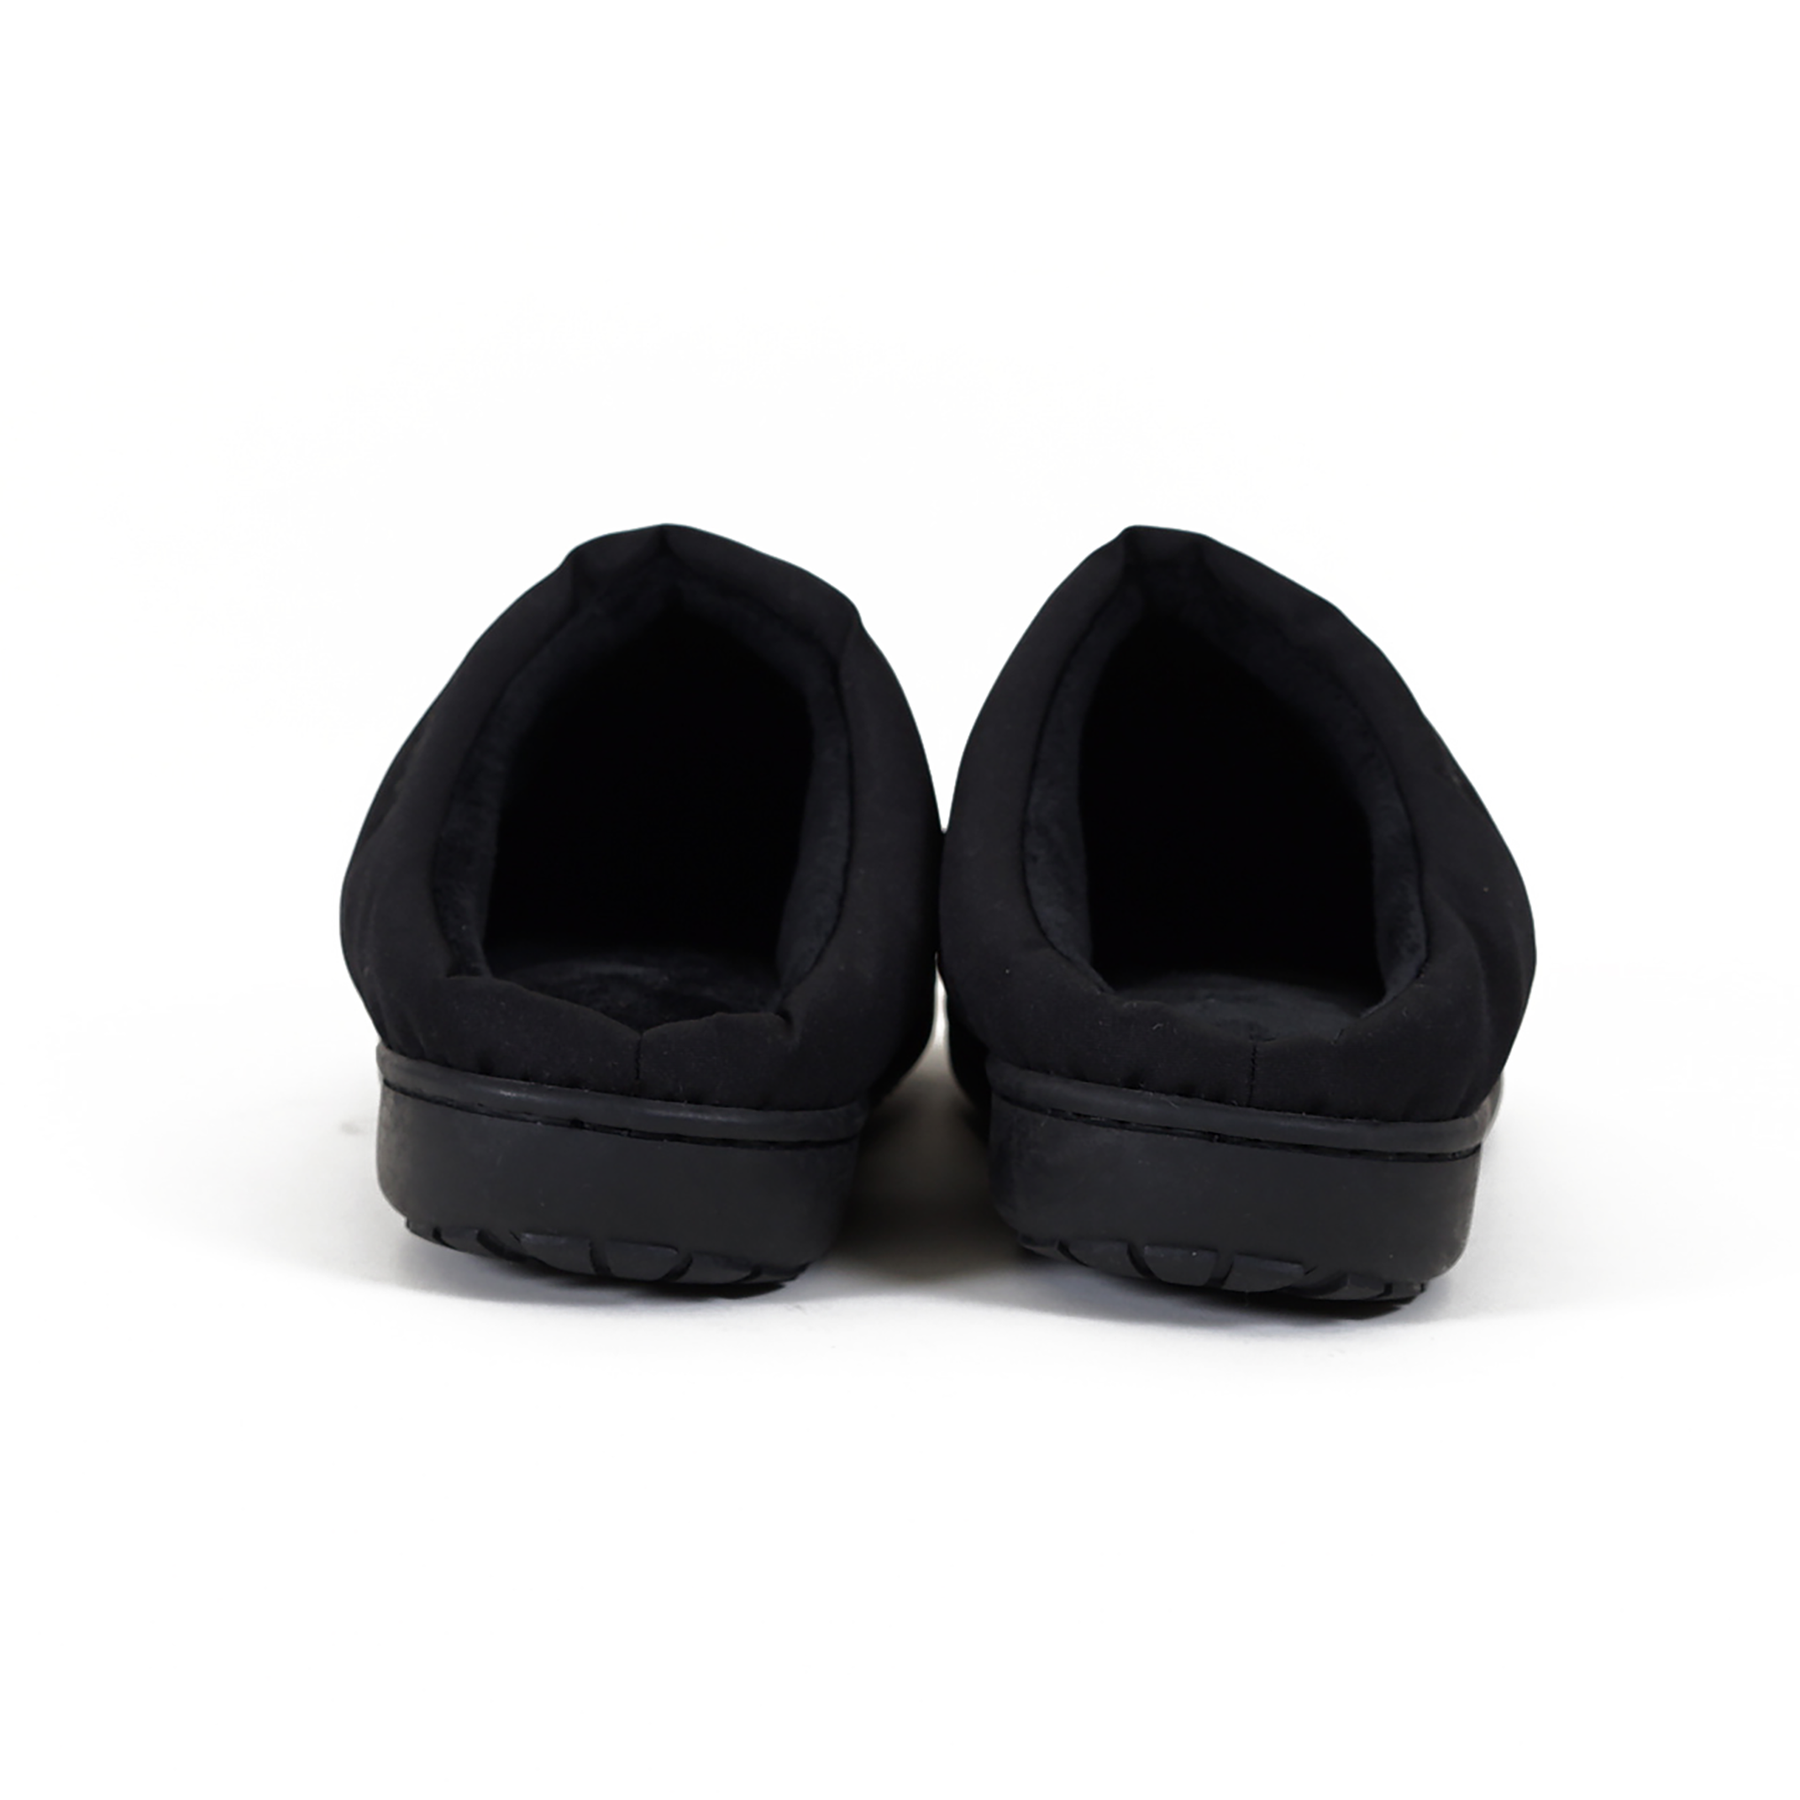 SUBU, Nannen Outdoor Slippers Black, Size, 1, Slippers,